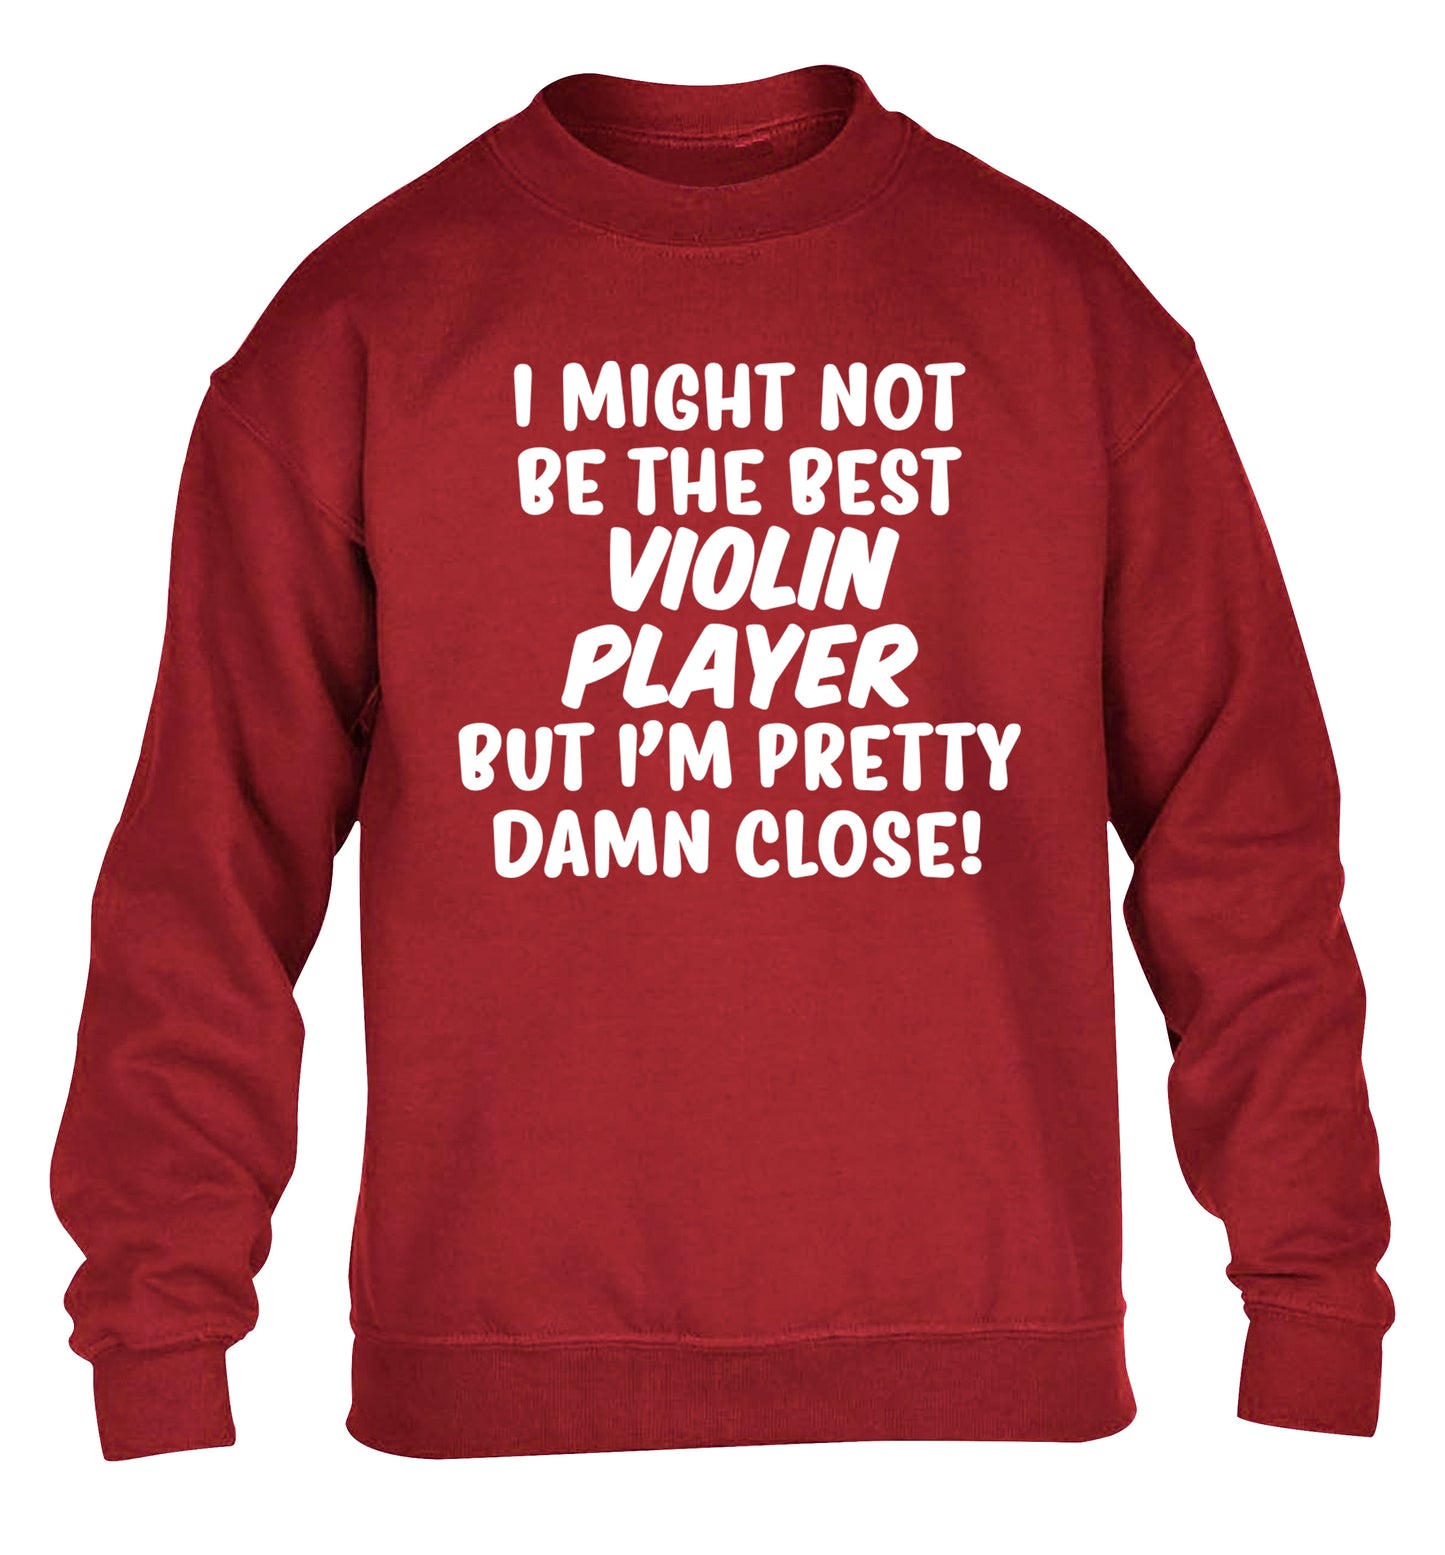 I might not be the best violin player but I'm pretty close children's grey sweater 12-13 Years